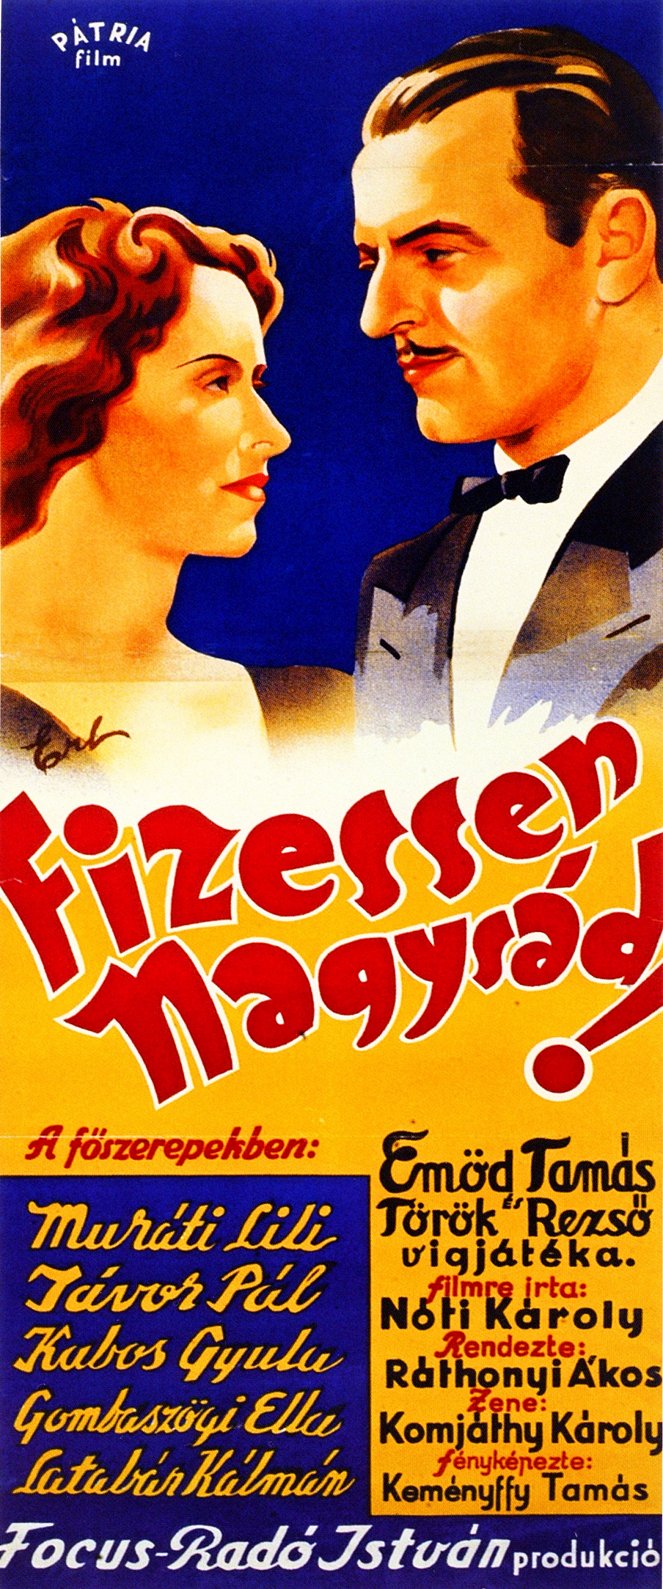 Fizessen, nagysád! - Posters